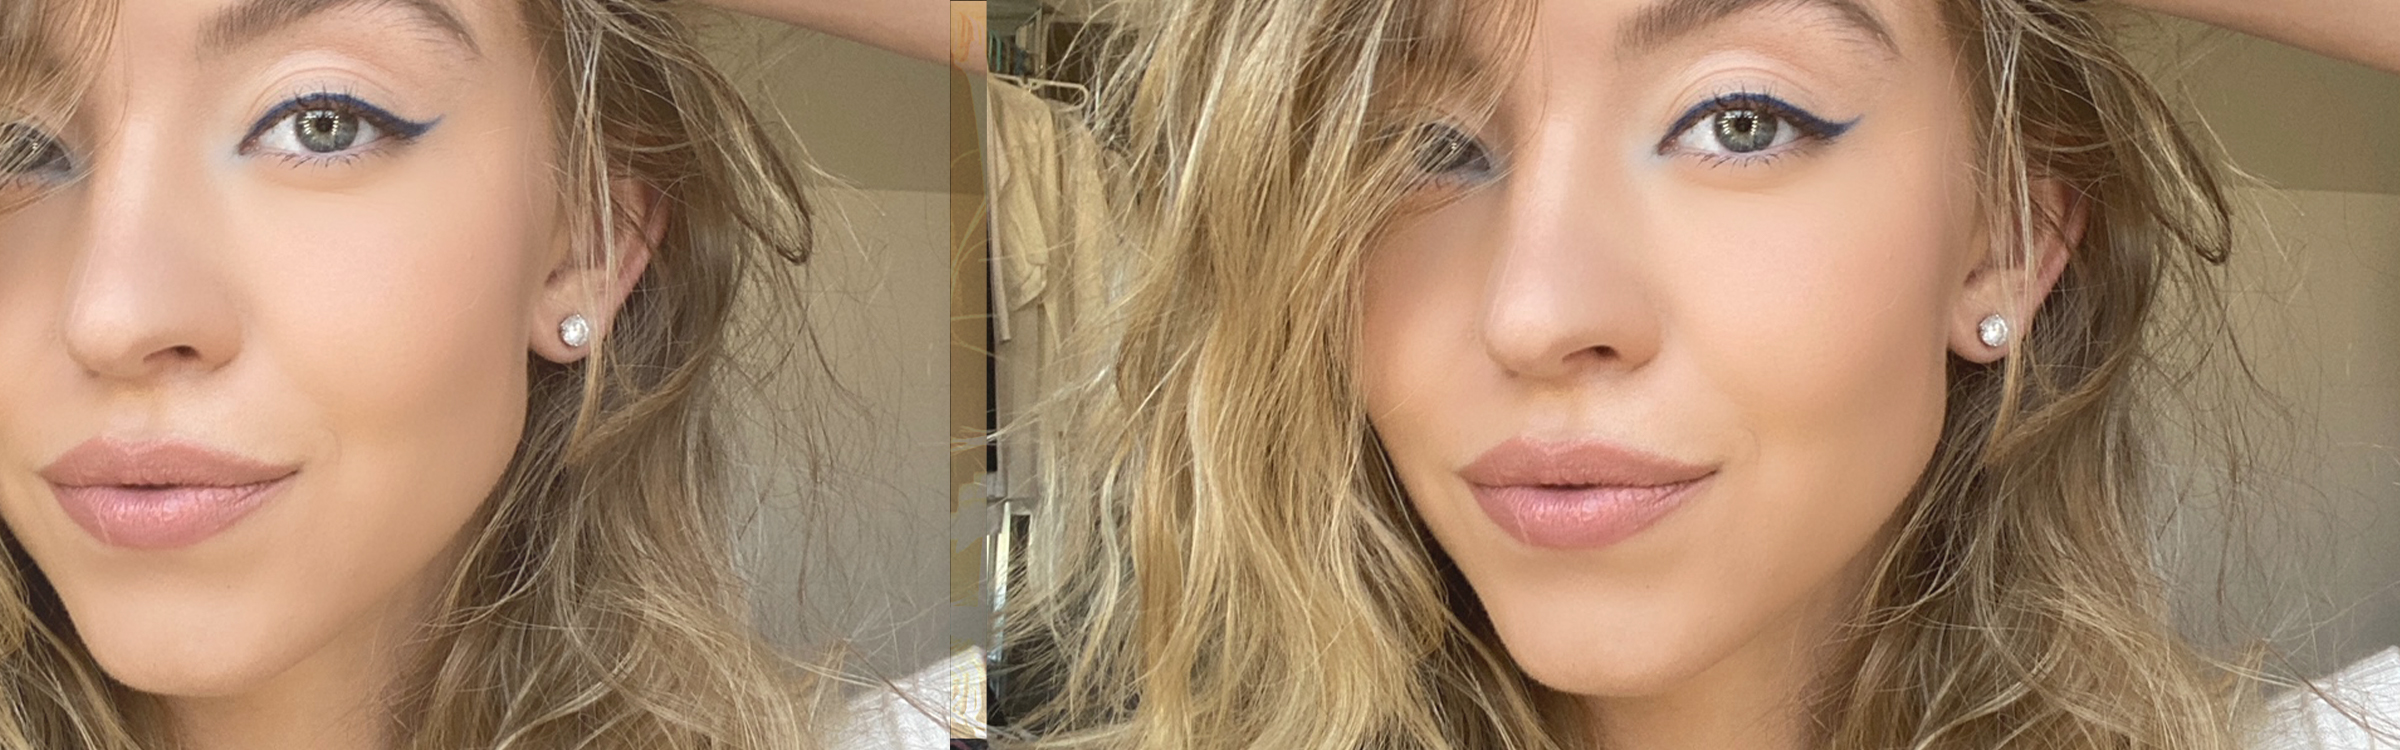 We Had a Tell-All Beauty Chat With Sydney Sweeney—From Hair Hacks to Acne Scars